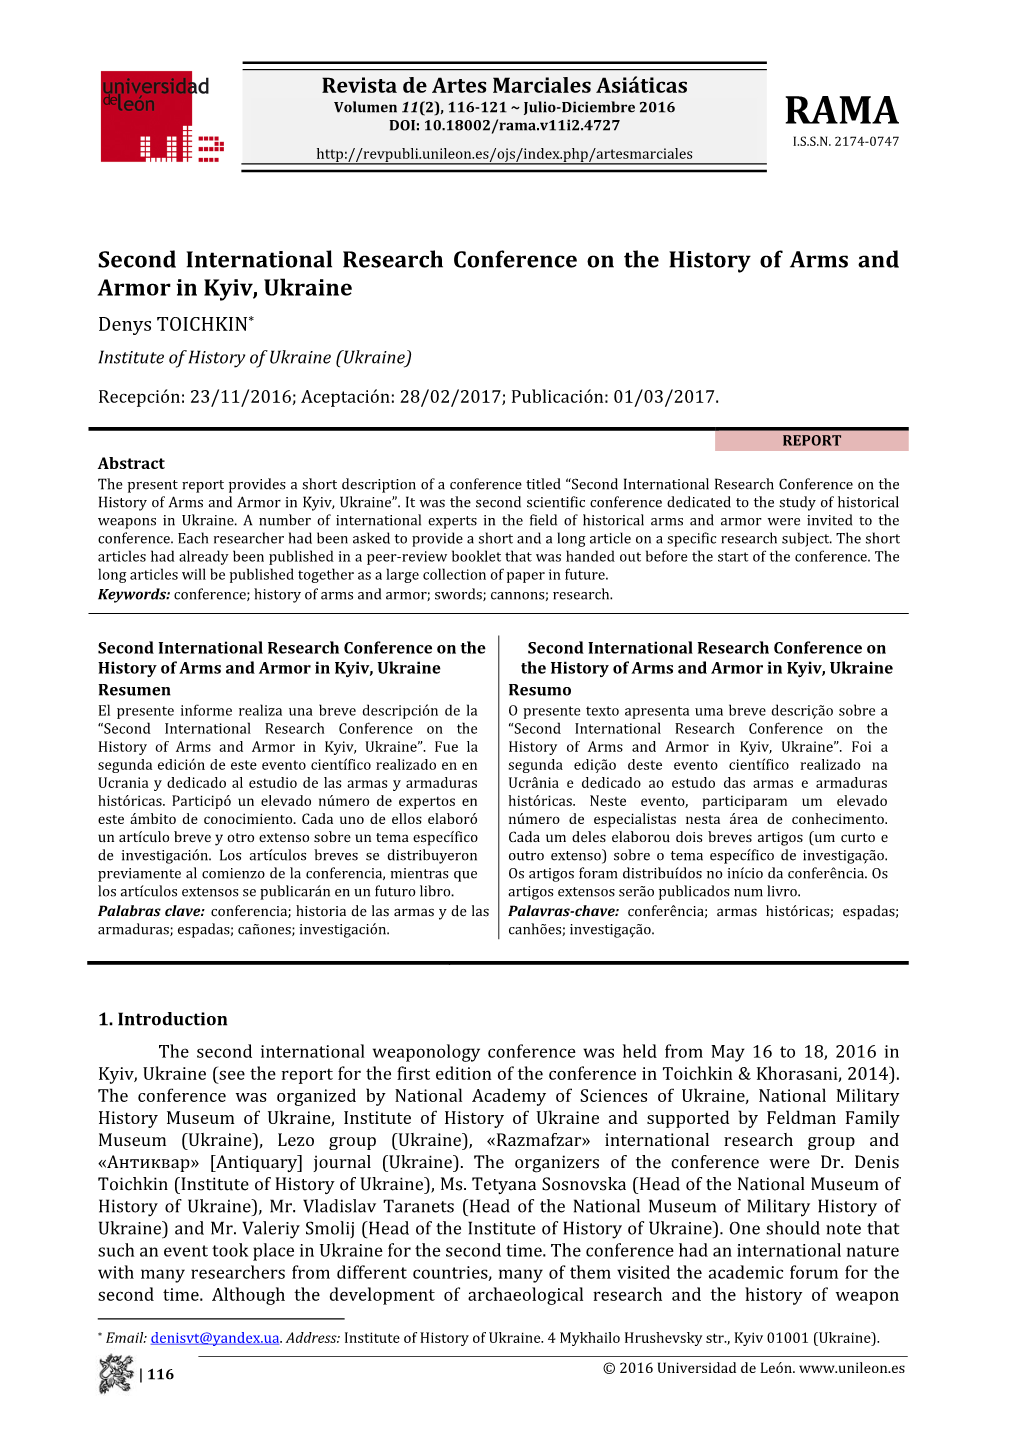 Second International Research Conference on the History of Arms and Armor in Kyiv, Ukraine Denys TOICHKIN* Institute of History of Ukraine (Ukraine)